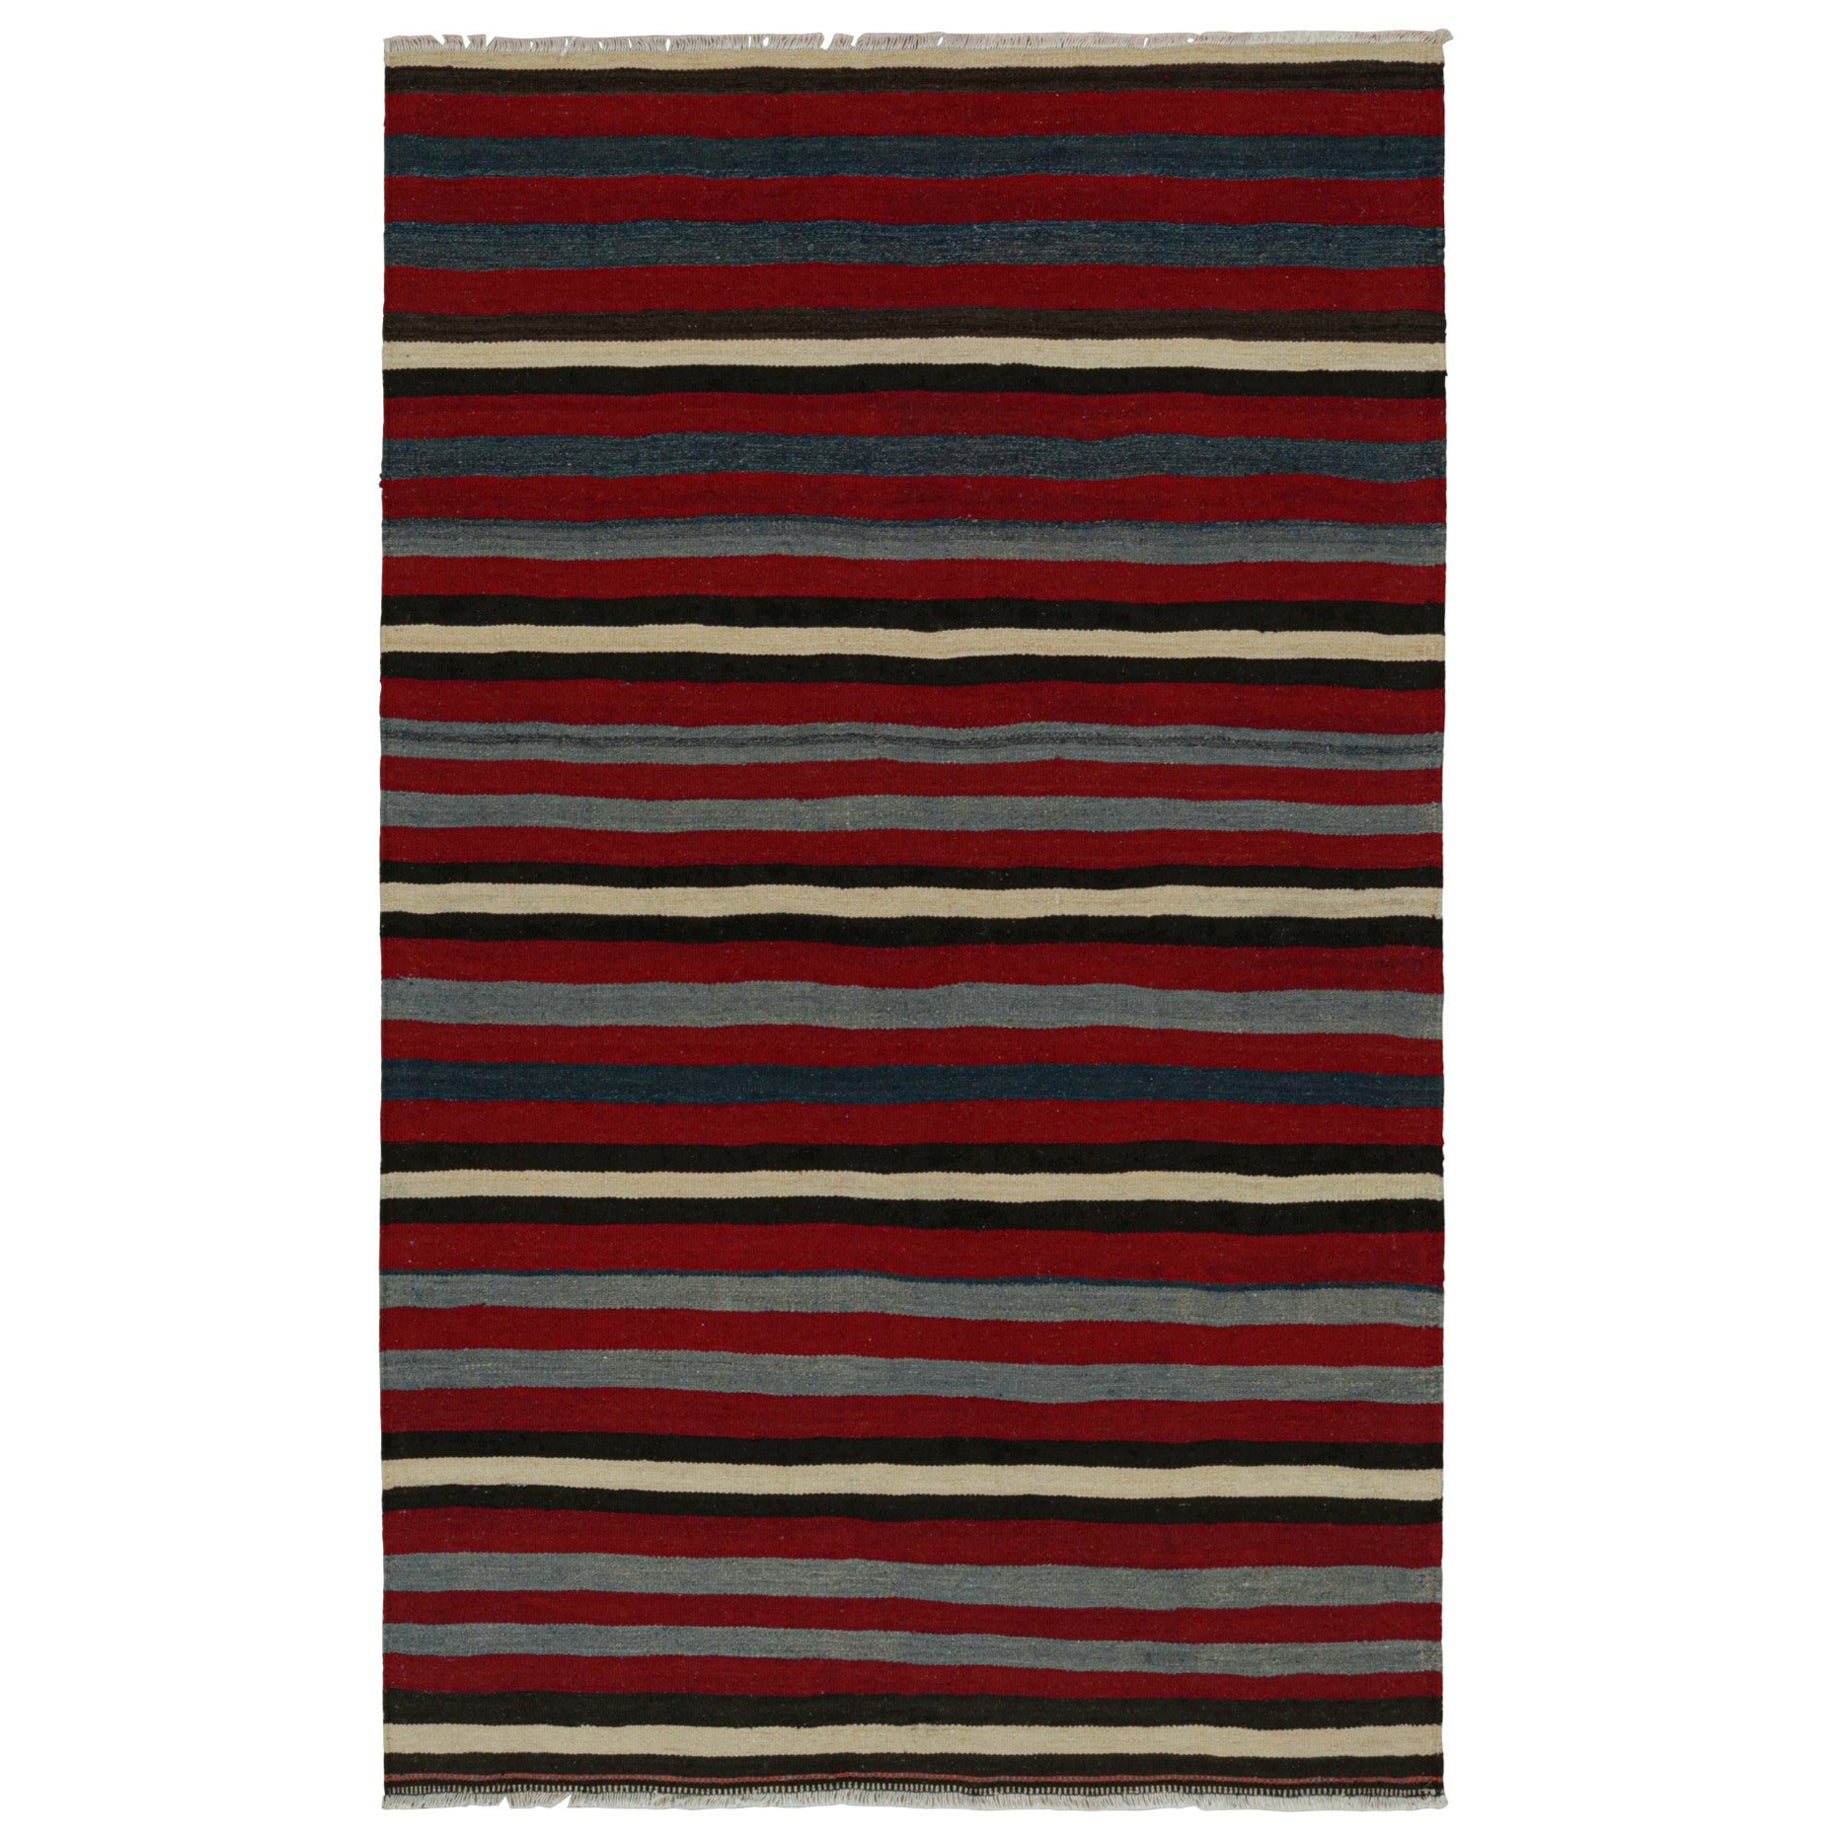 Rug & Kilim’s Afghan Tribal Kilim Rug in Red with Geometric Striped Patterns For Sale